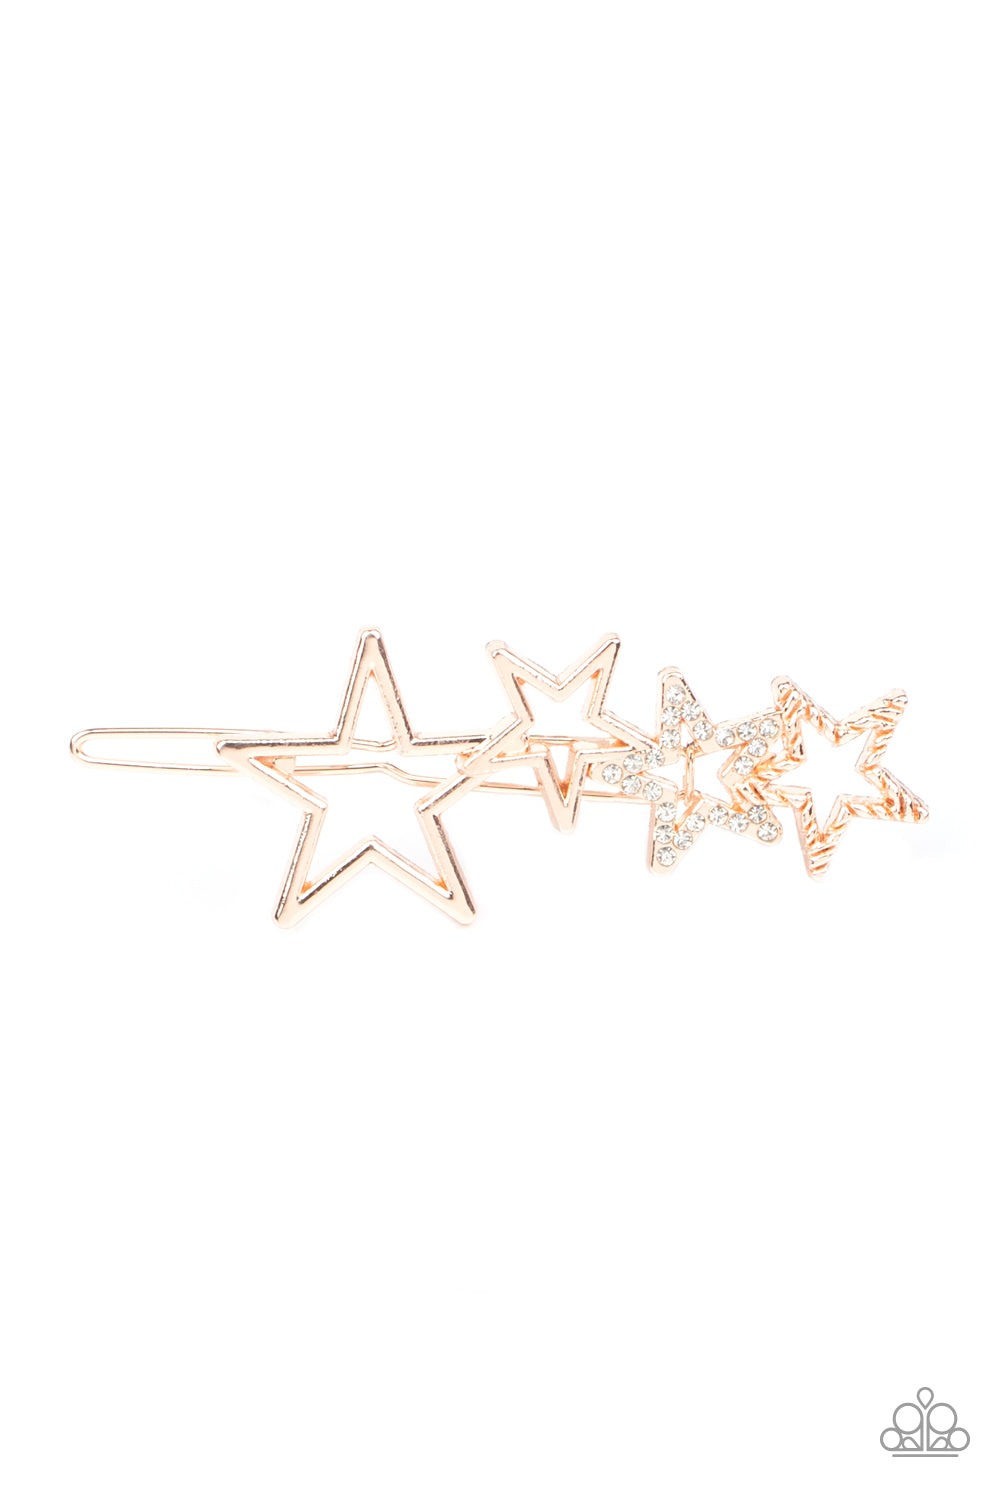 From STAR To Finish - Gold Hairclip